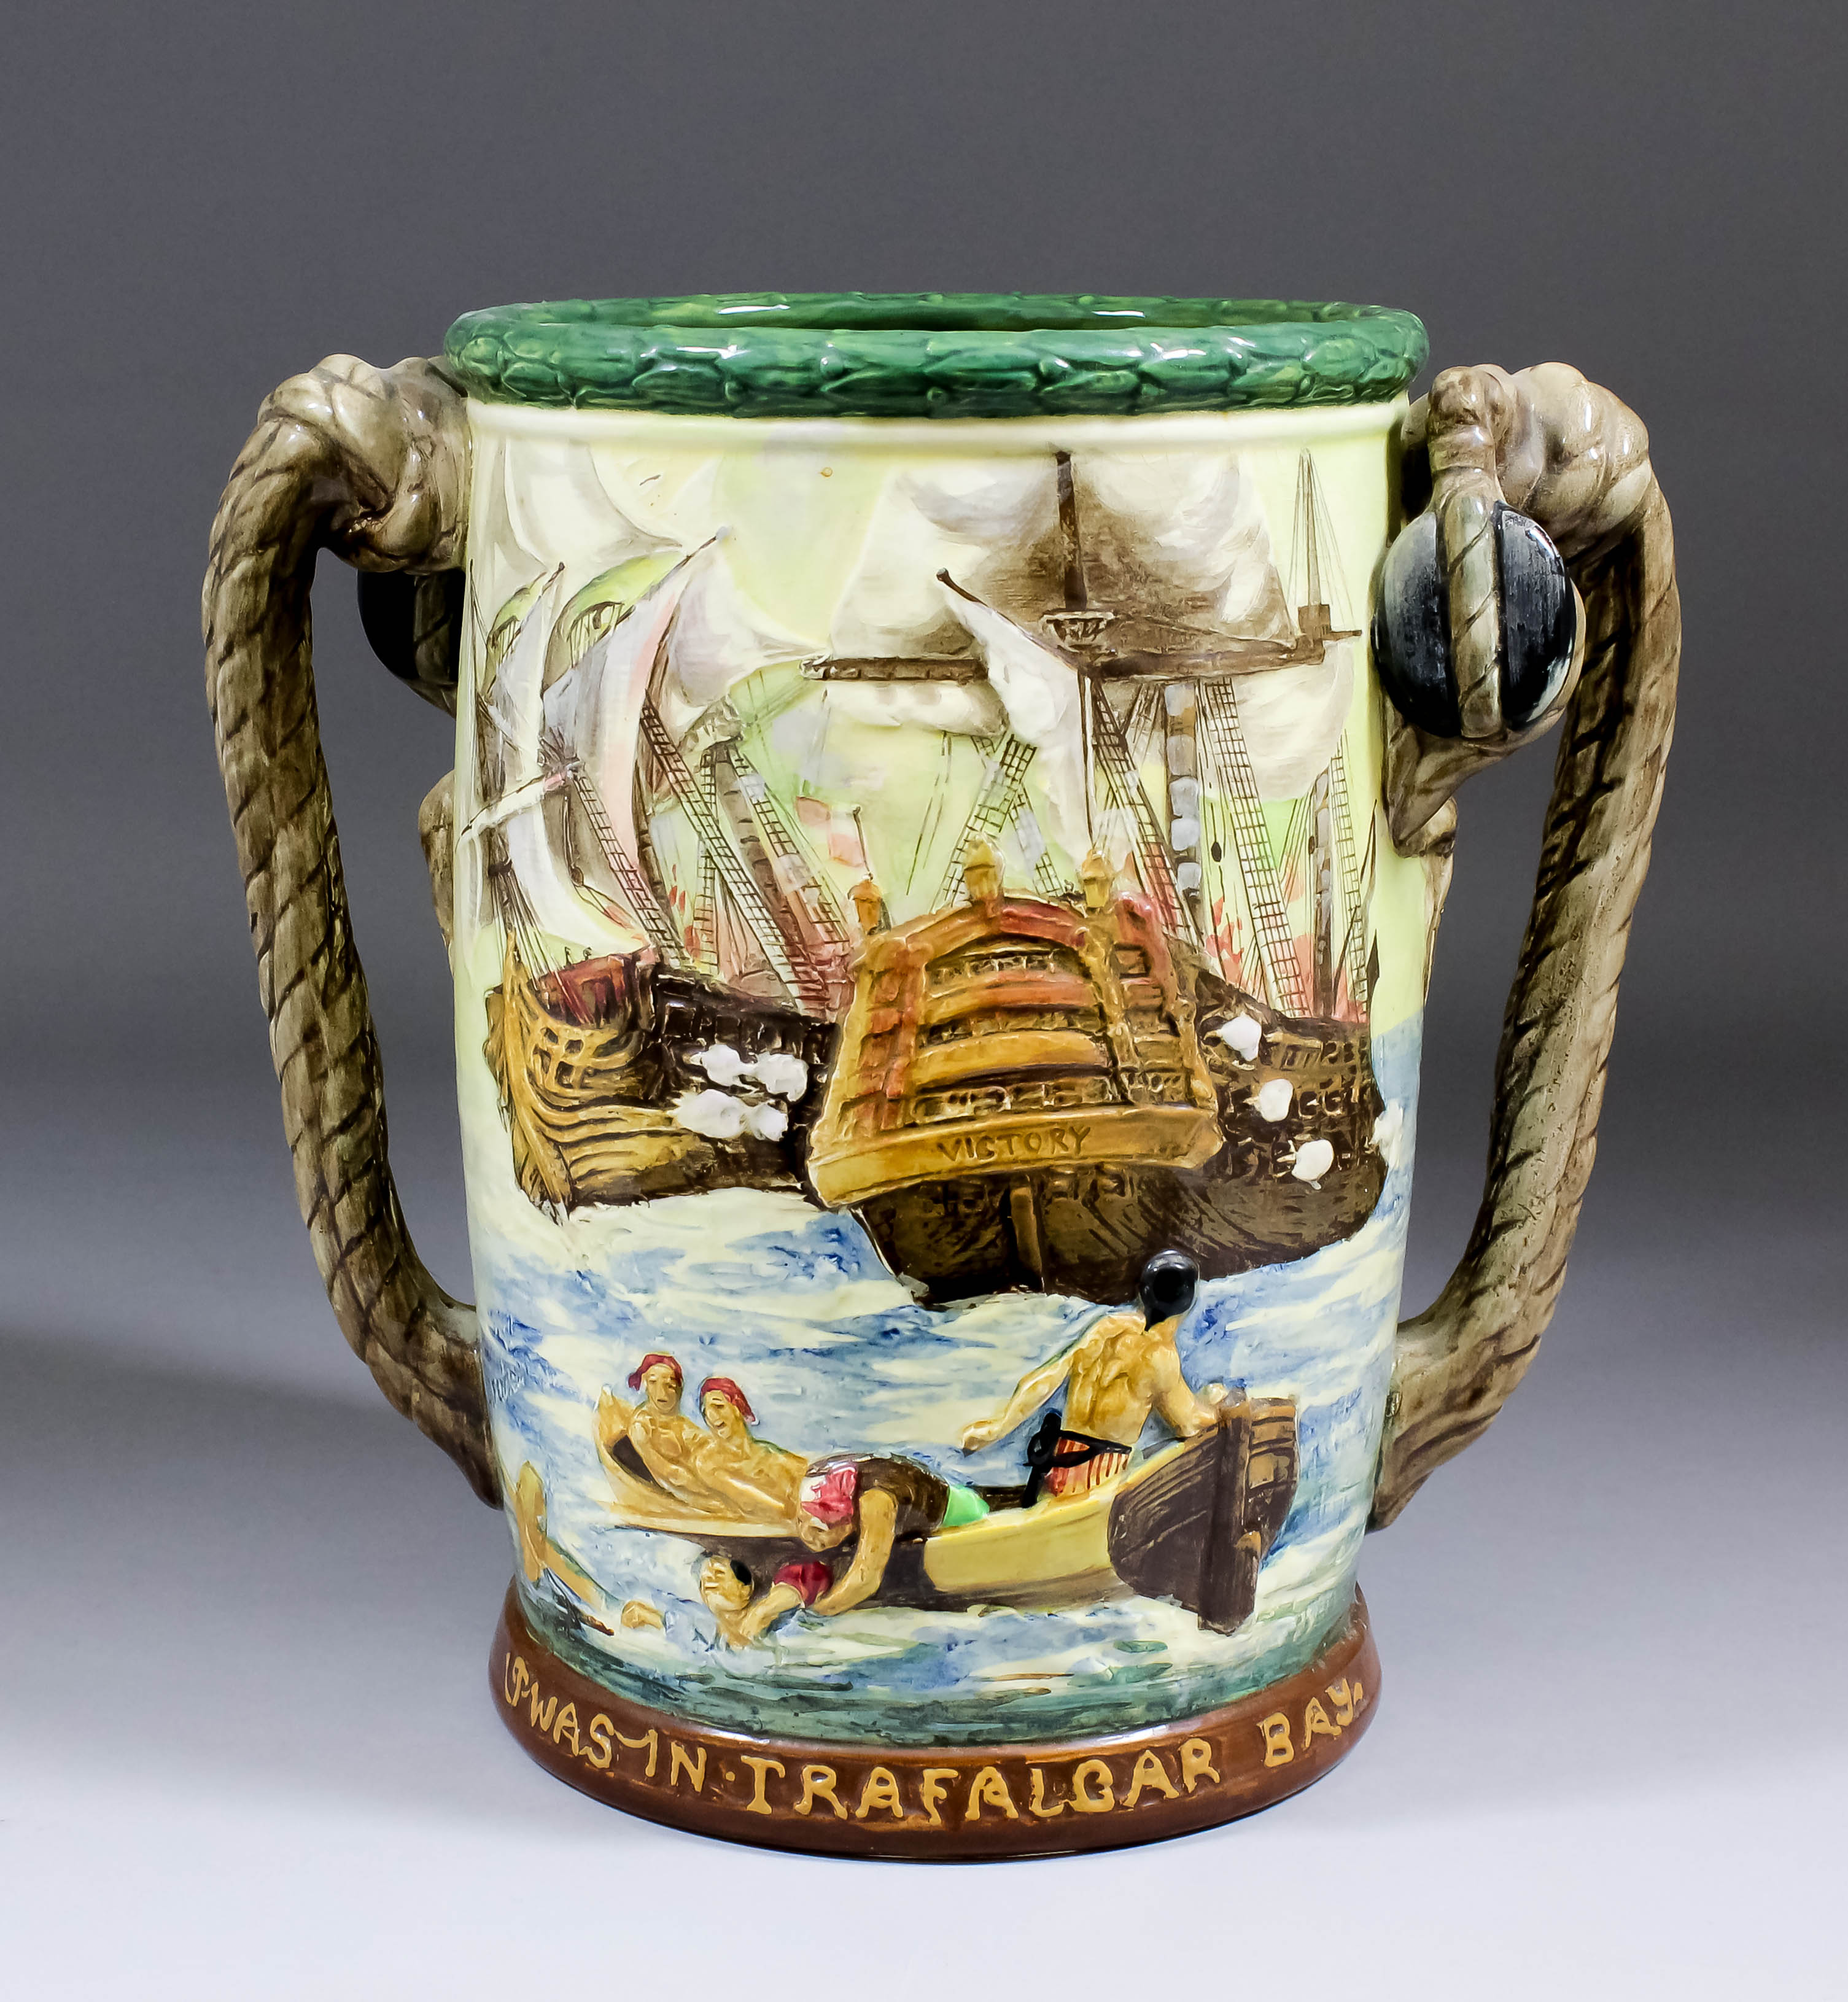 A Royal Doulton pottery "The Lord Nelson" two-handled loving cup designed by Charles Noke and - Image 3 of 3